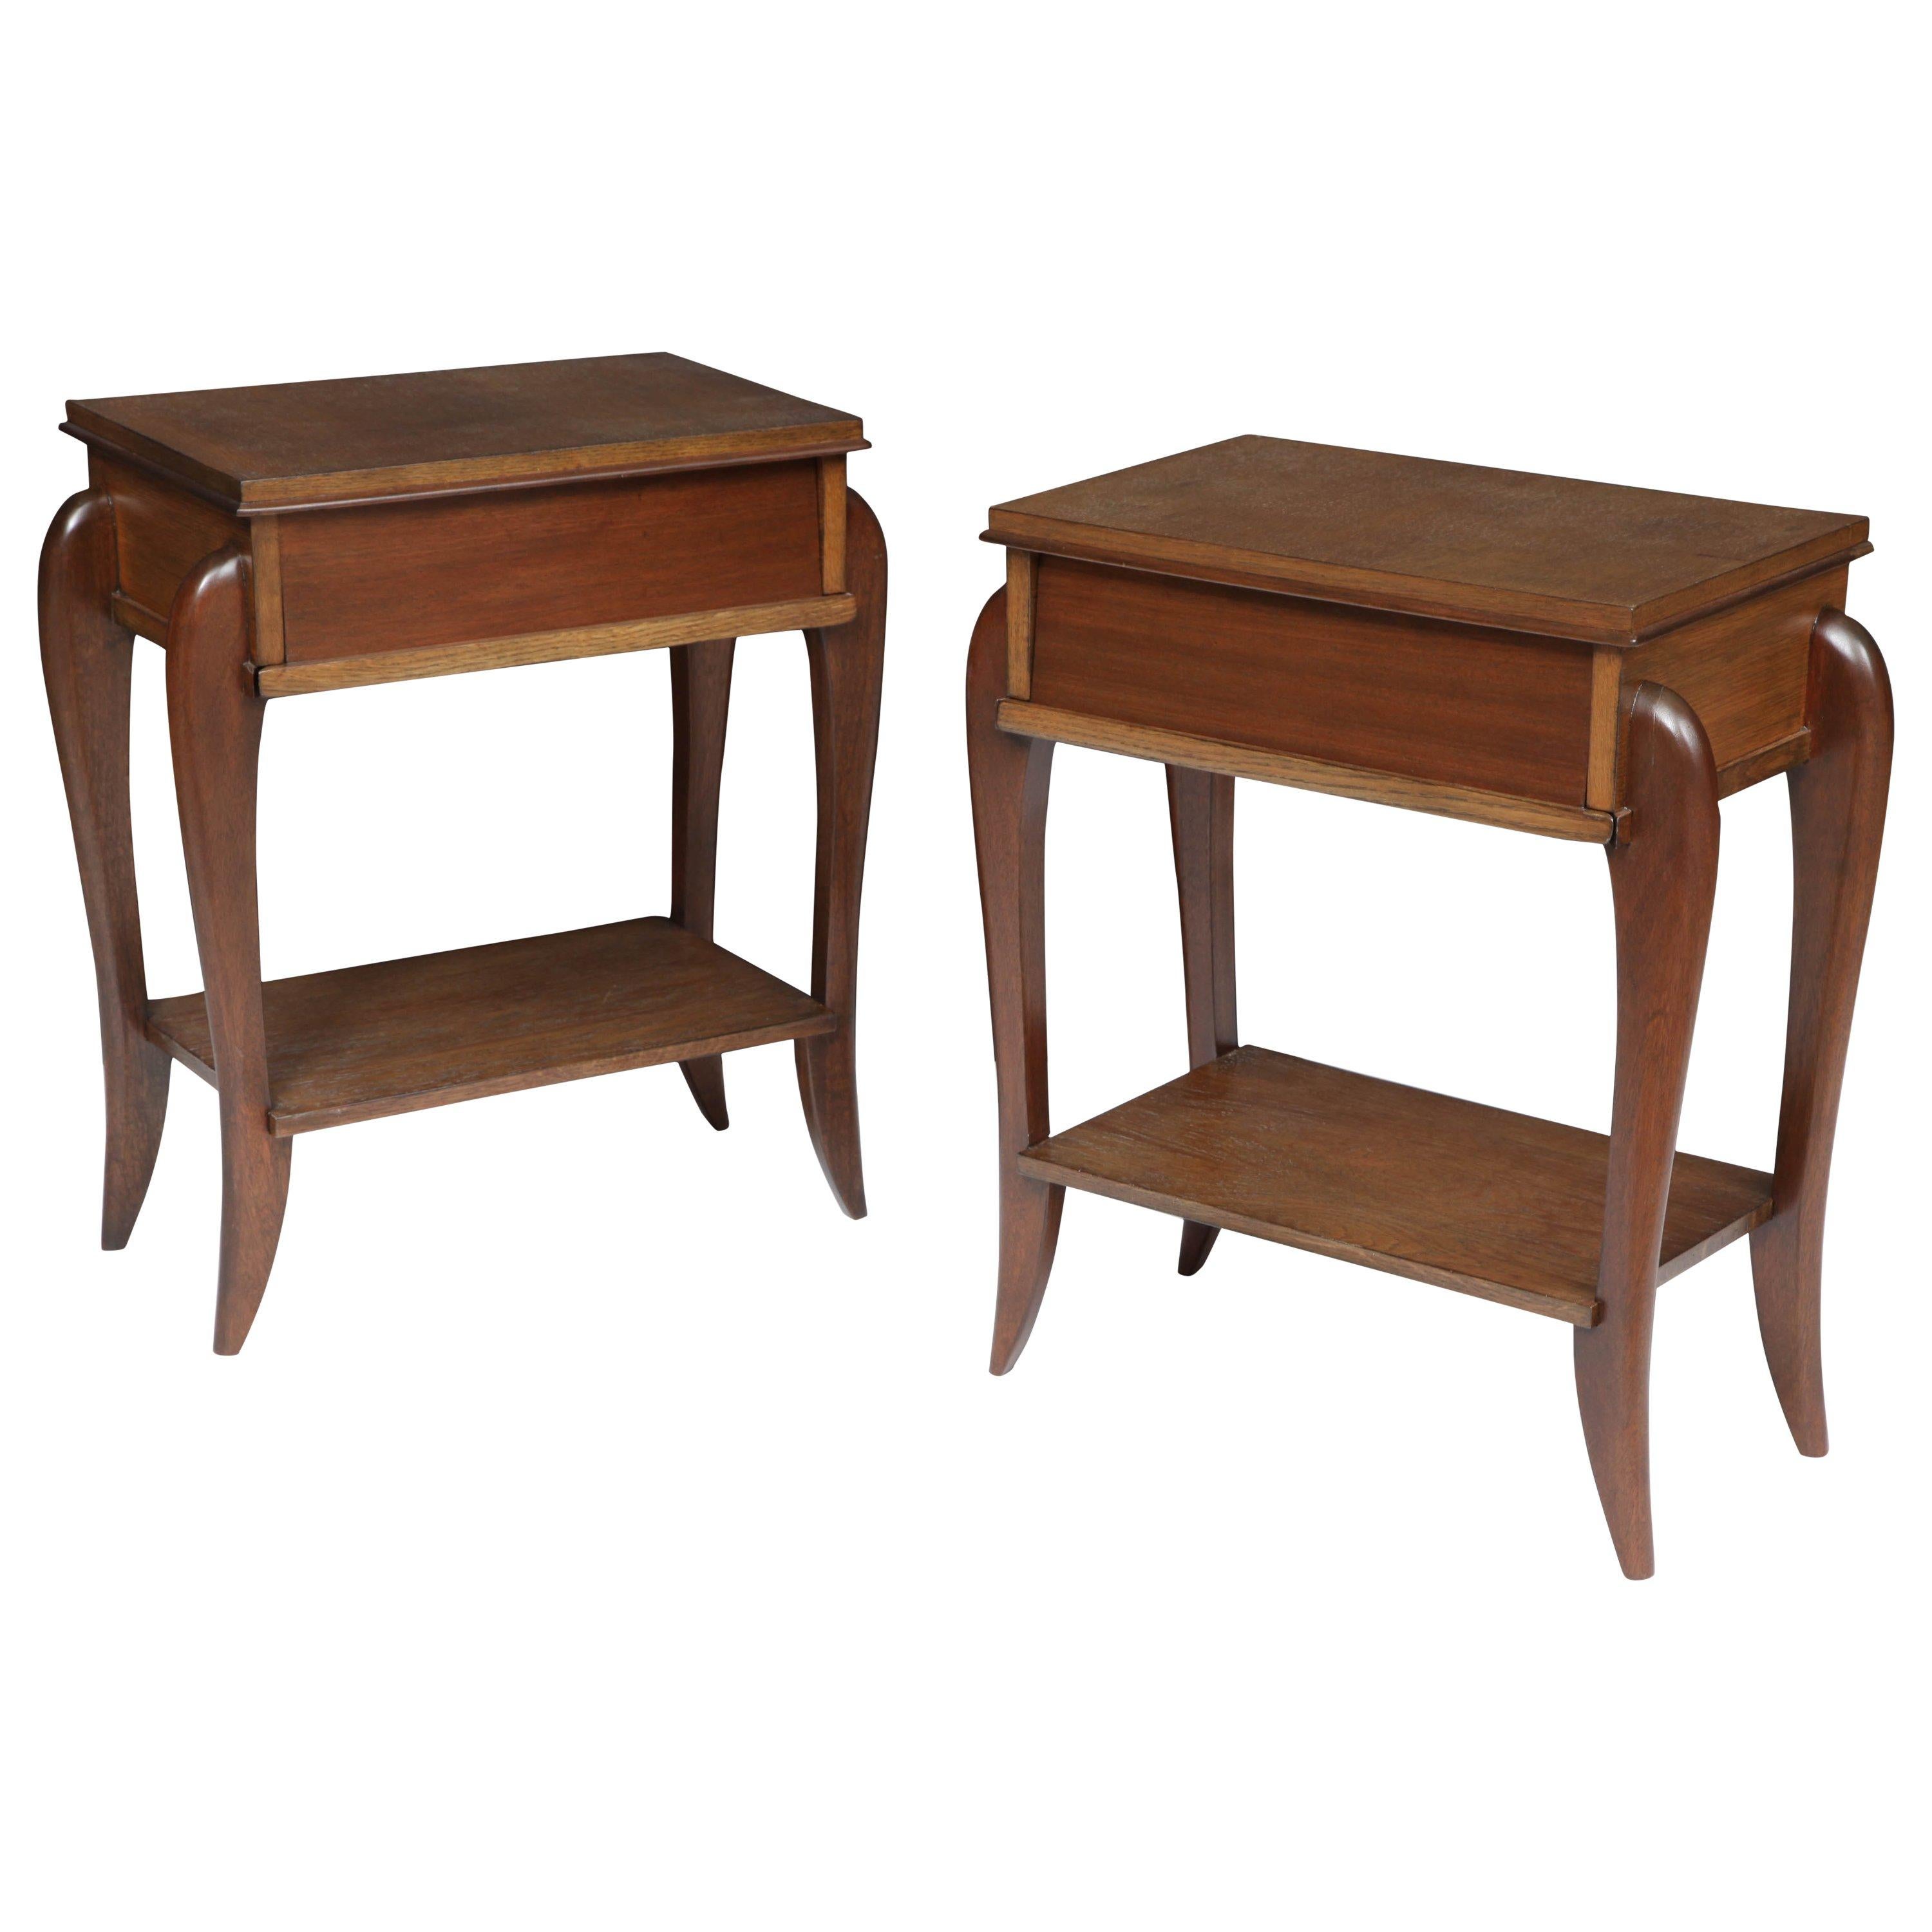 Pair of 1950s French Nightstands with Drawer and Shelf